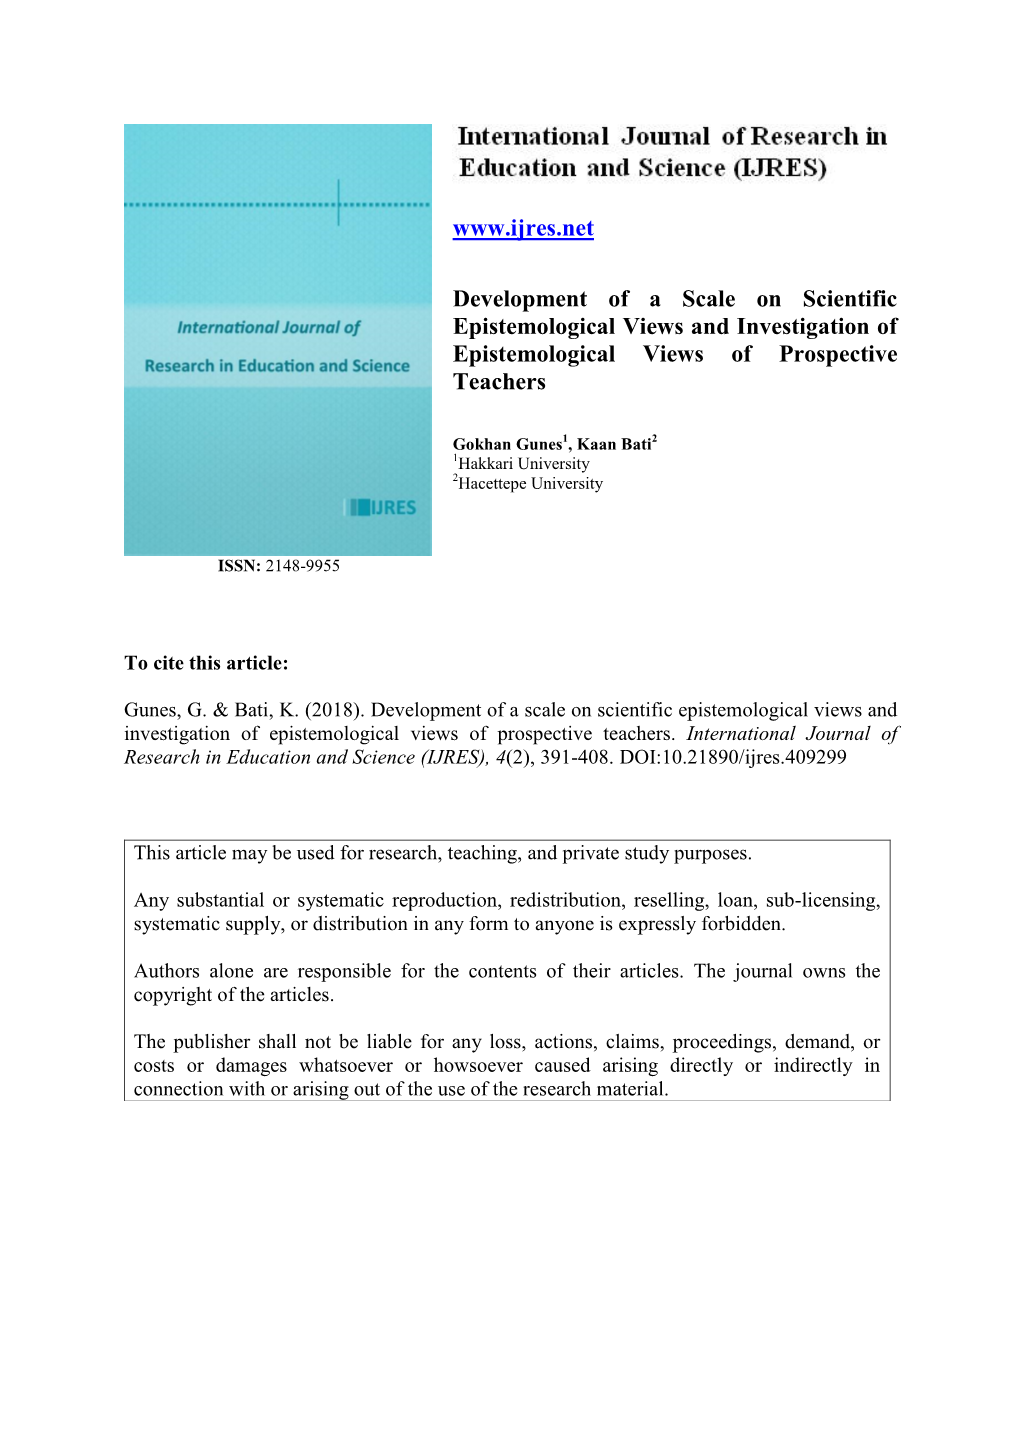 Development of a Scale on Scientific Epistemological Views and Investigation of Epistemological Views of Prospective Teachers